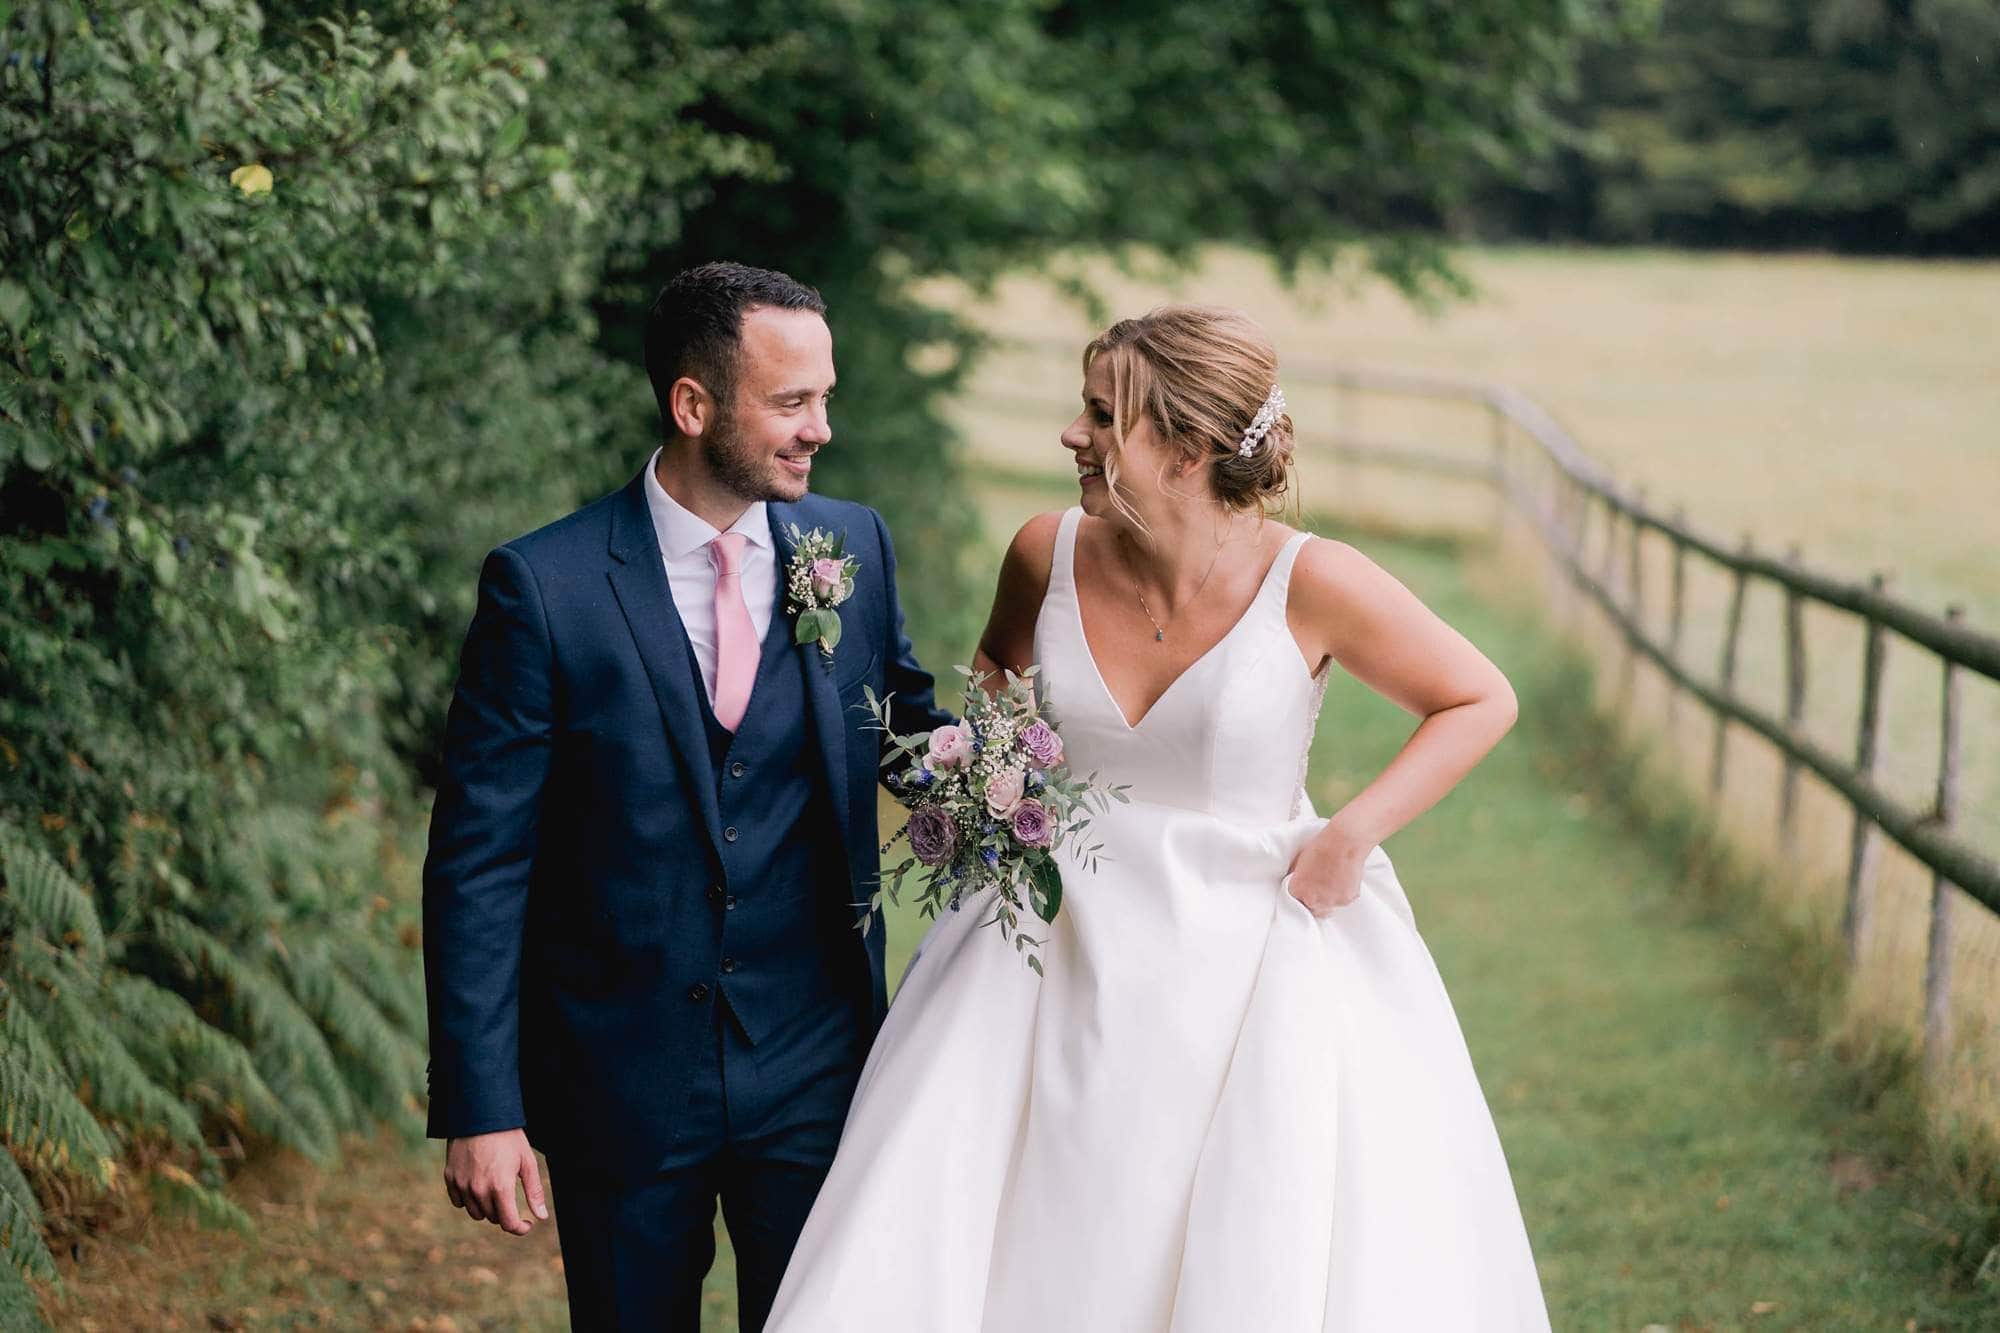 Bride and Groom Portraits at Blackstock Country Estate Wedding